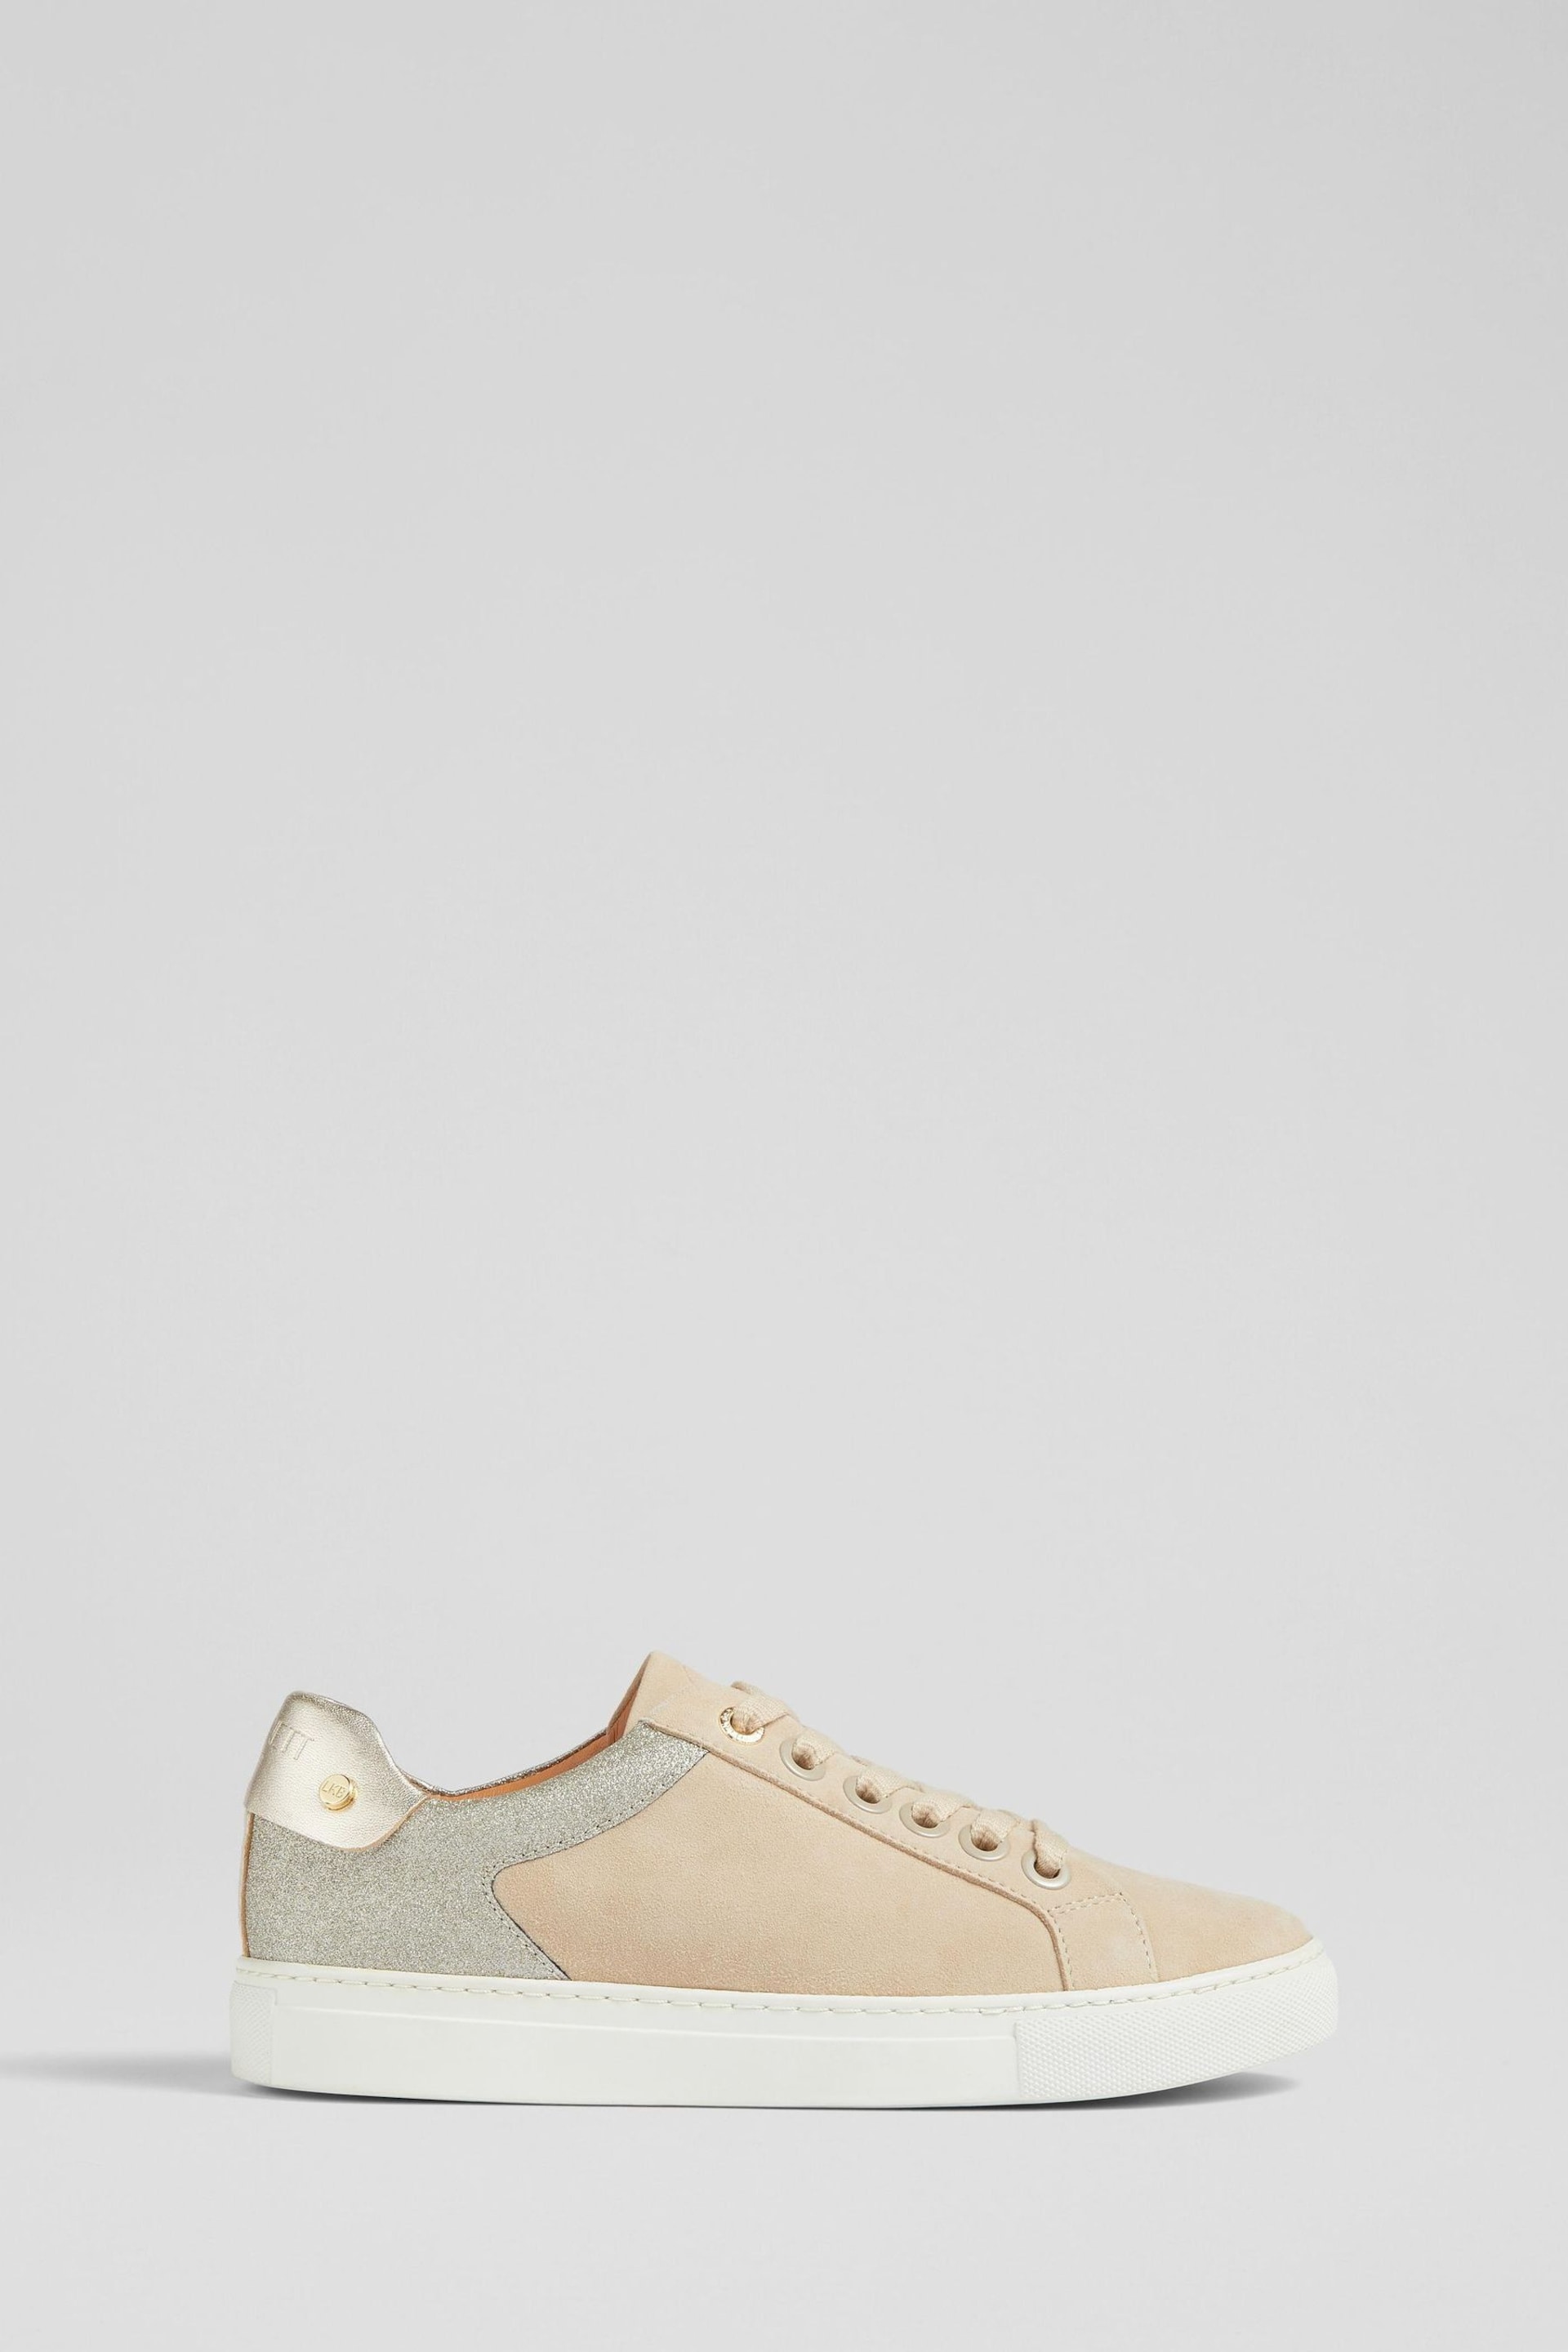 LK Bennett Natural Signature Trench & Gold Classic Stud Trainers - Image 1 of 4